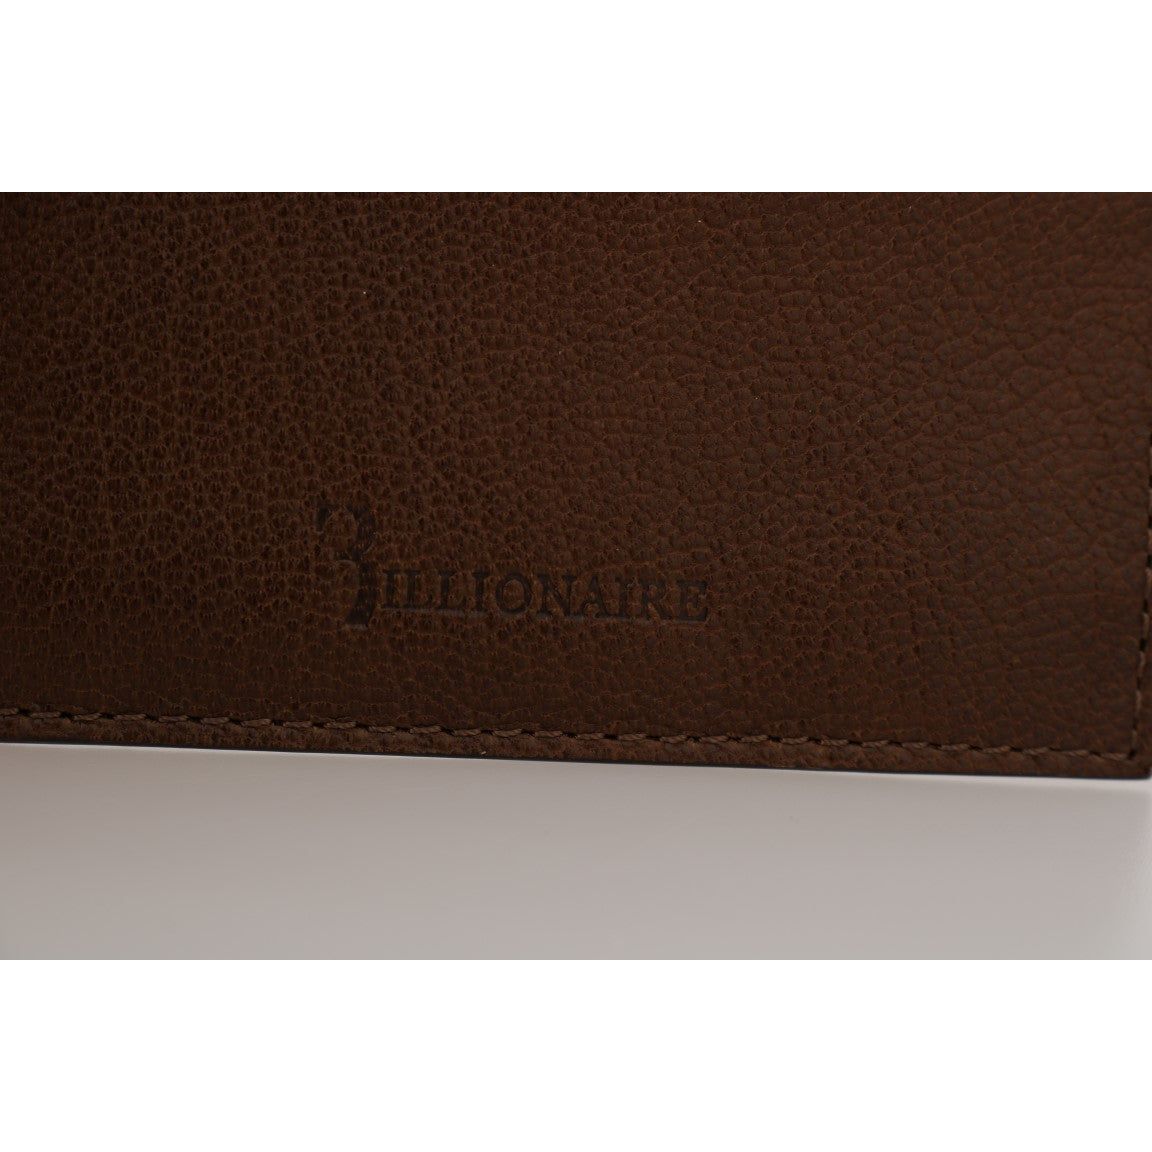 Billionaire Italian Couture Elegant Leather Men's Wallet in Brown Wallet brown-leather-cardholder-wallet 463442-brown-leather-cardholder-wallet-4.jpg